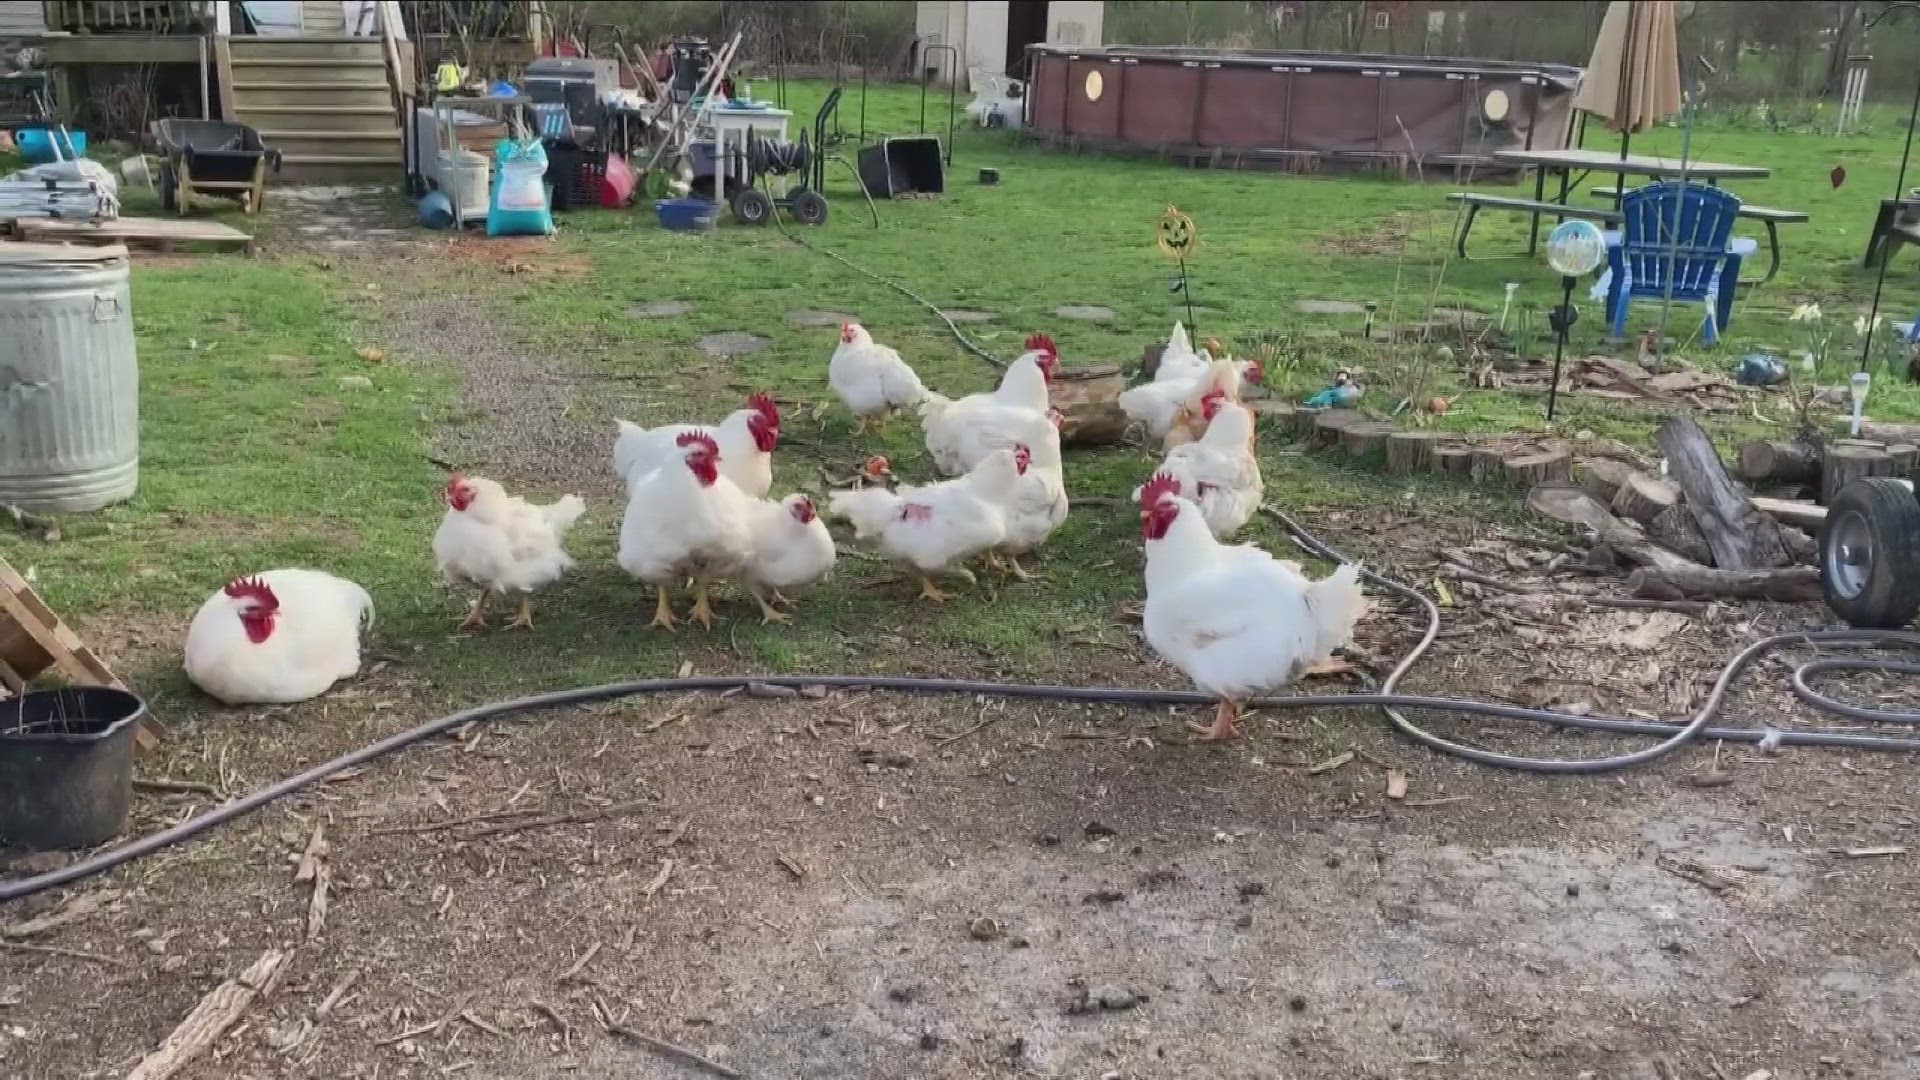 50 chickens missing from yard in Niagara County